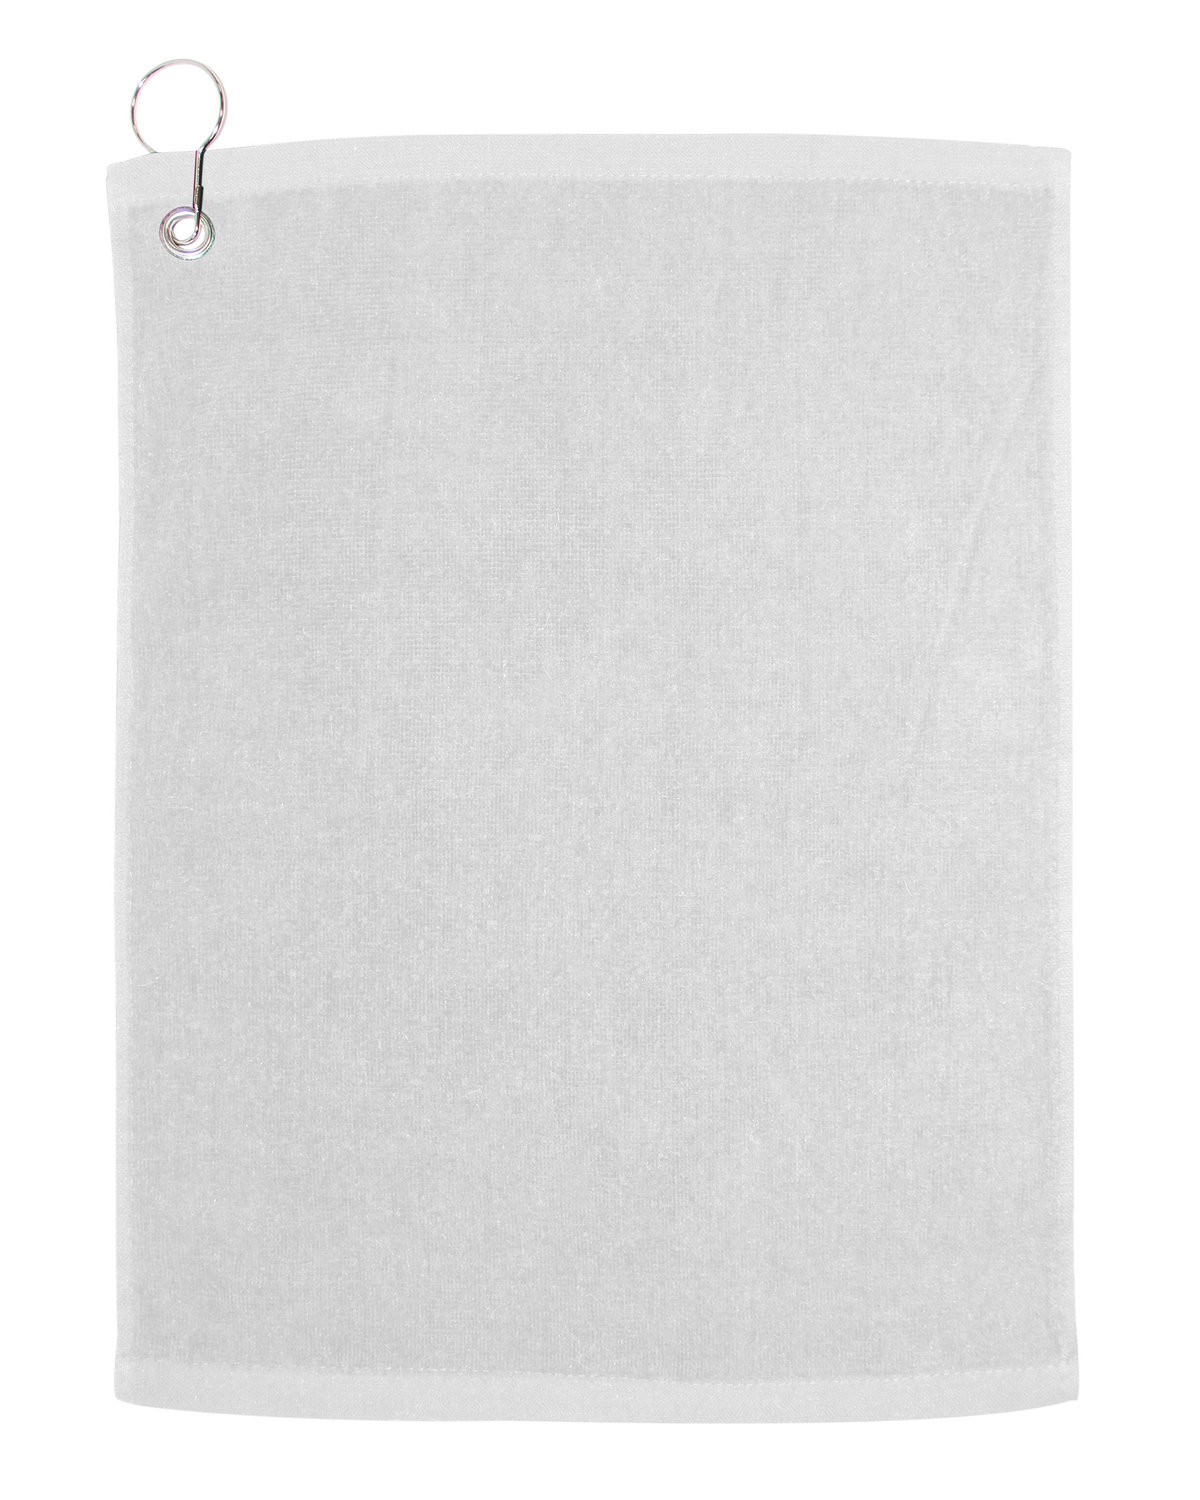 Large Rally Towel With Grommet And Hook-Carmel Towel Company